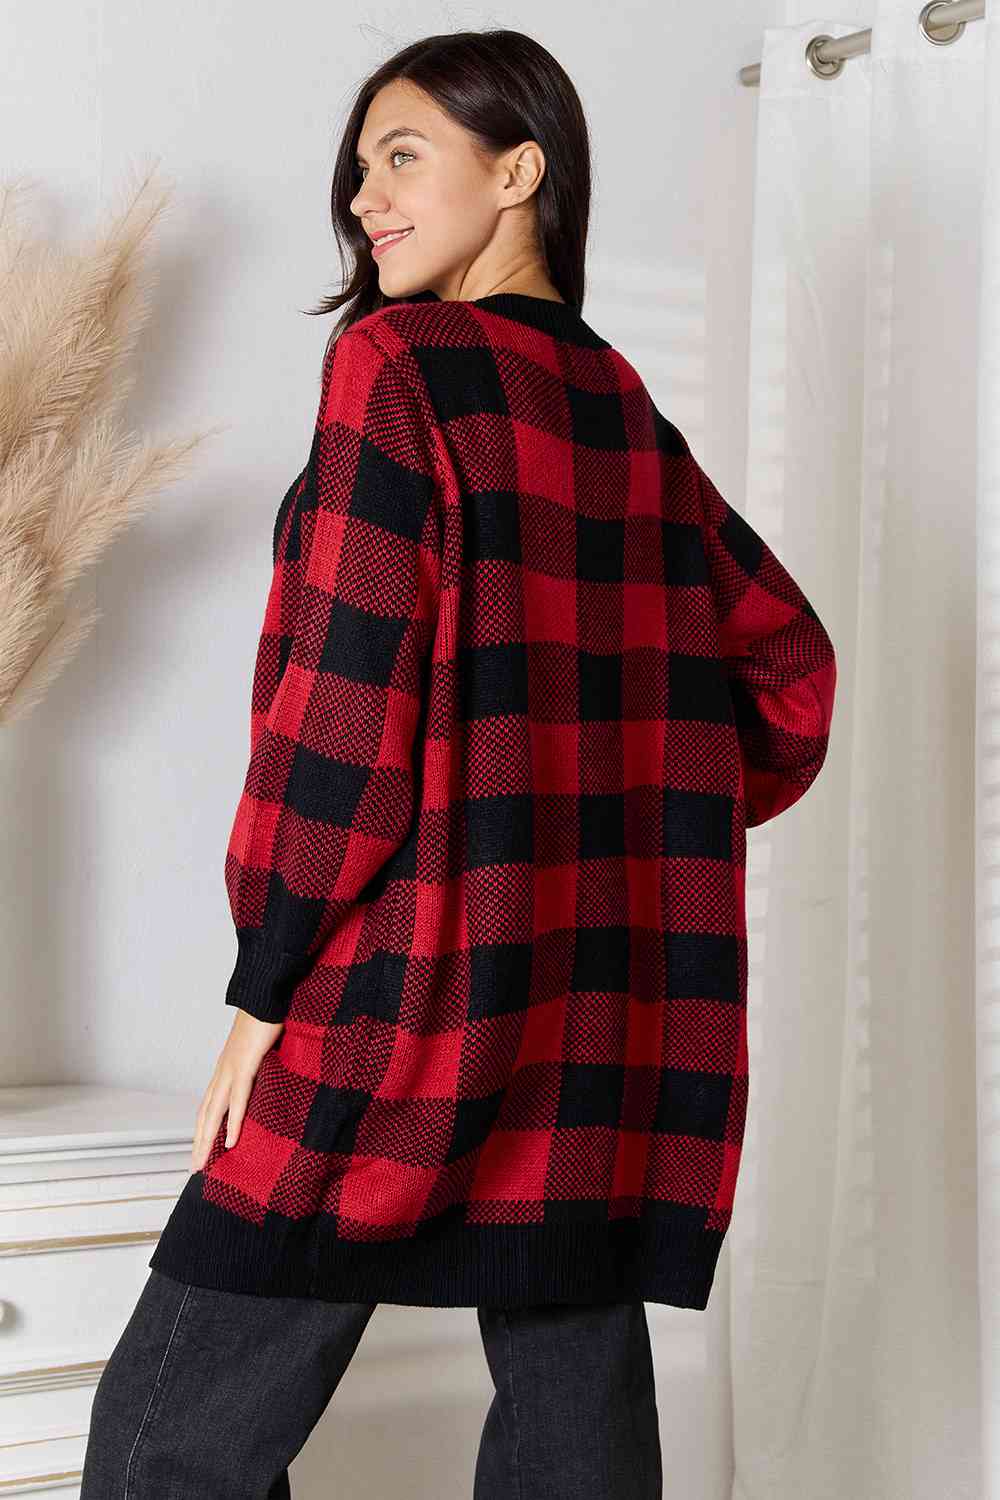 Heimish Full Size Buffalo Check Plaid Open Front Cardigan with Pockets